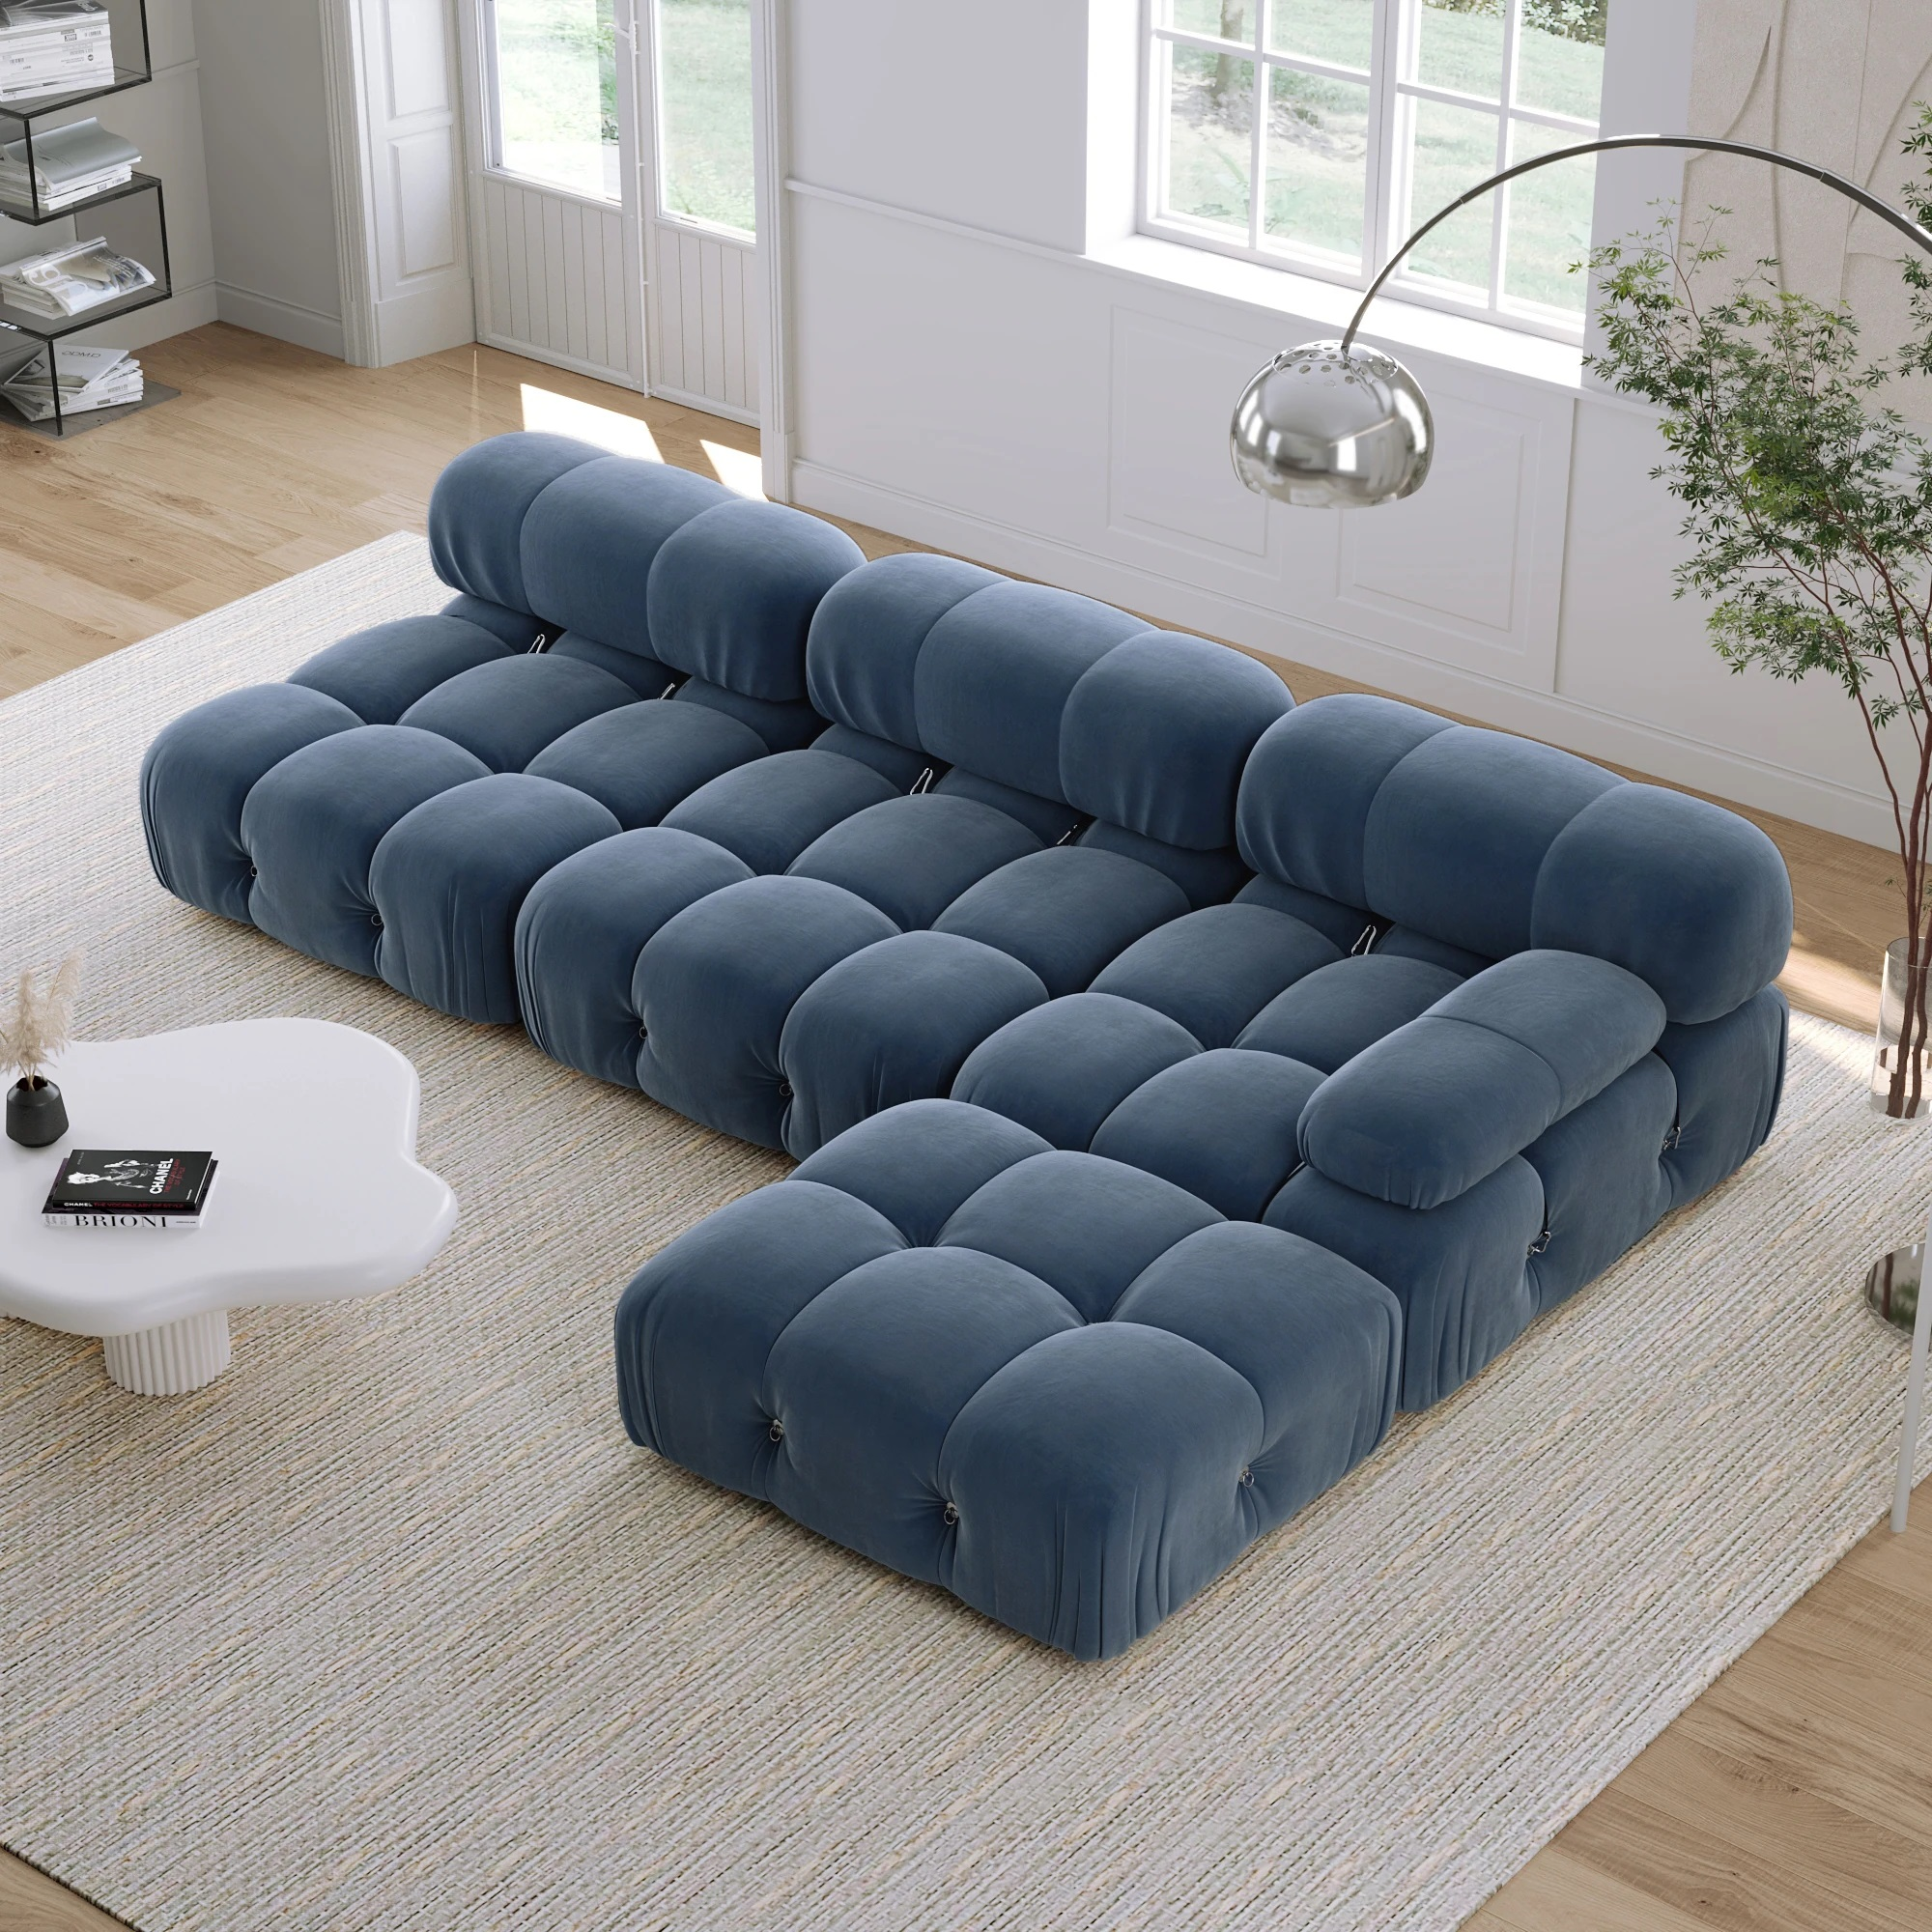 How to choose floor couches